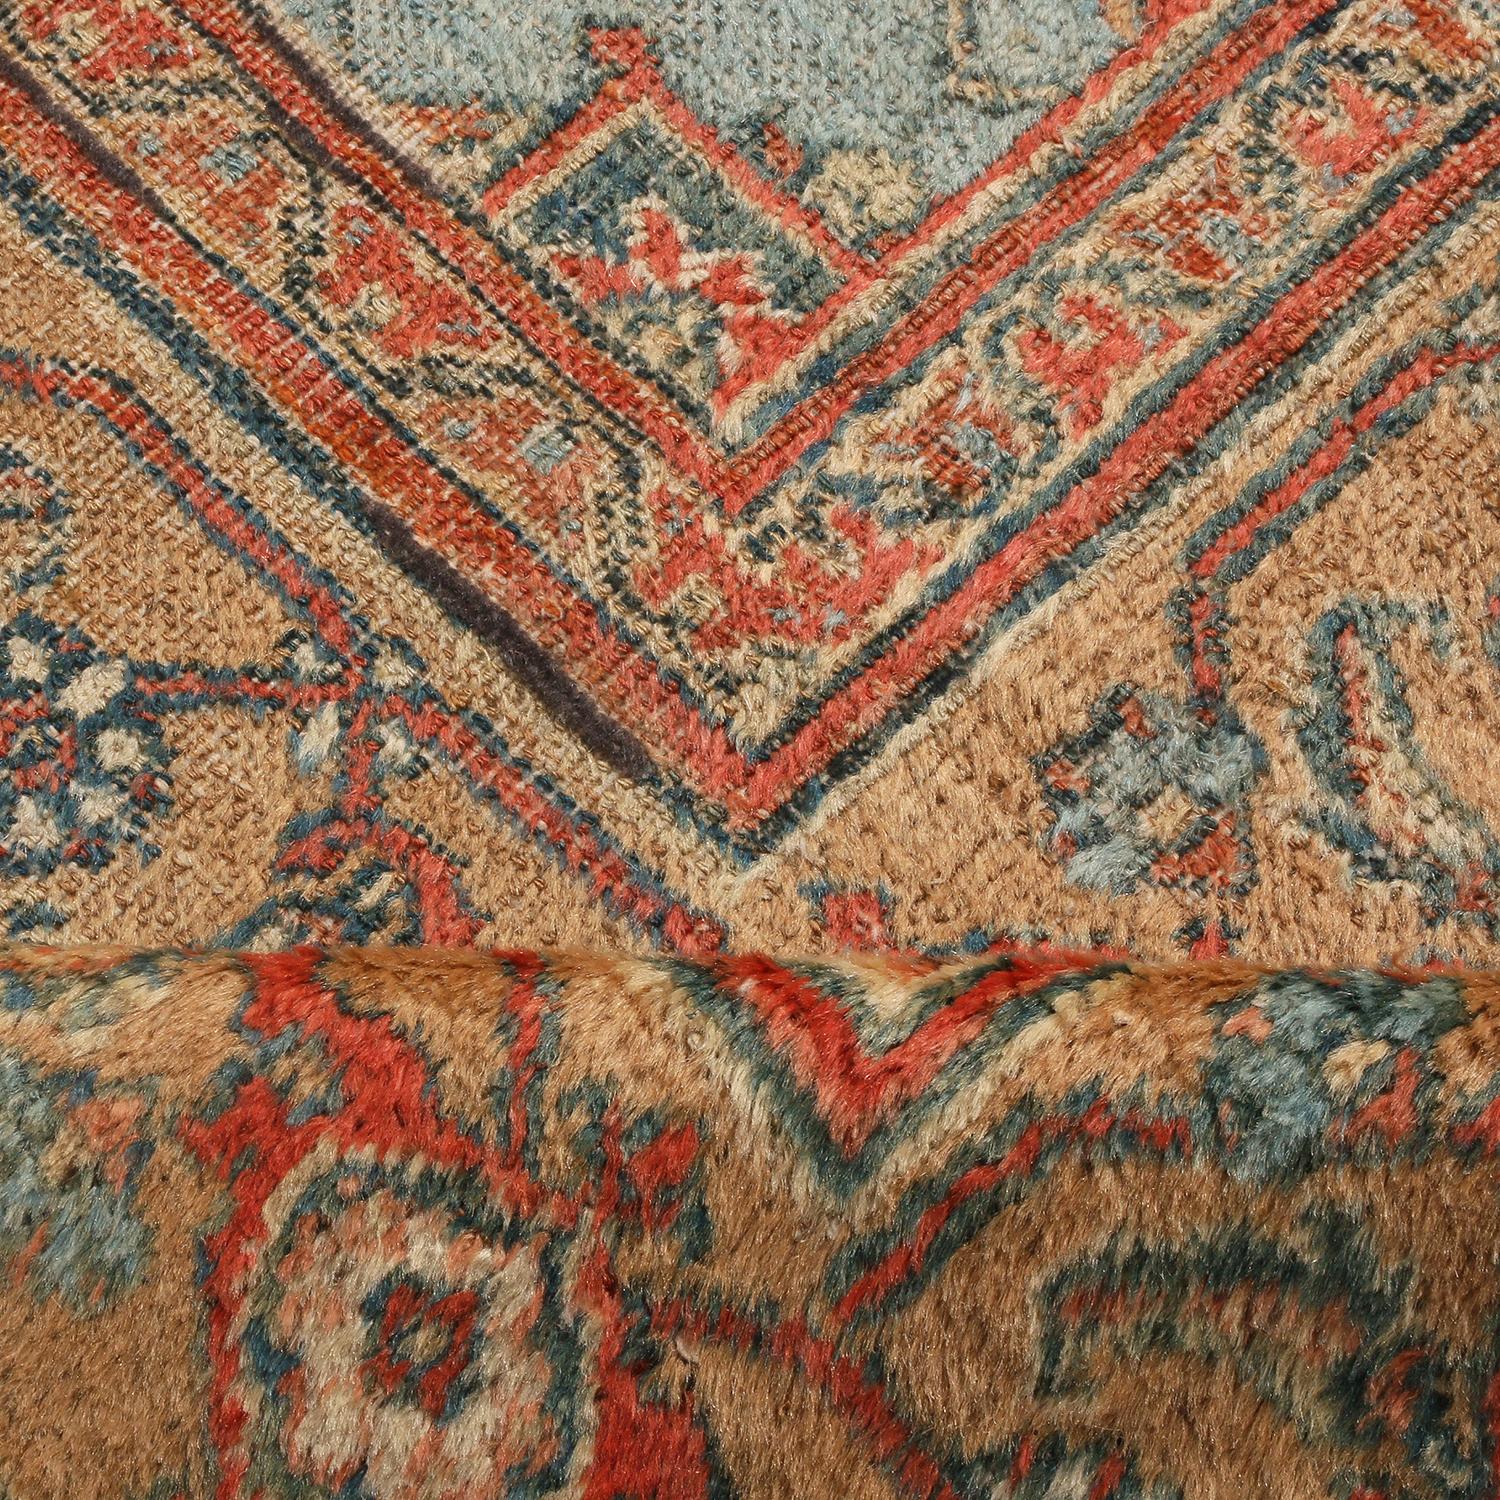 Hand knotted in Persia originating between 1870-1880, this antique floral Doroksh rug marries a unique colorway with a celebrated traditional pattern known as the Herati, or “fish” pattern seen dancing in the field and border alike. The variations